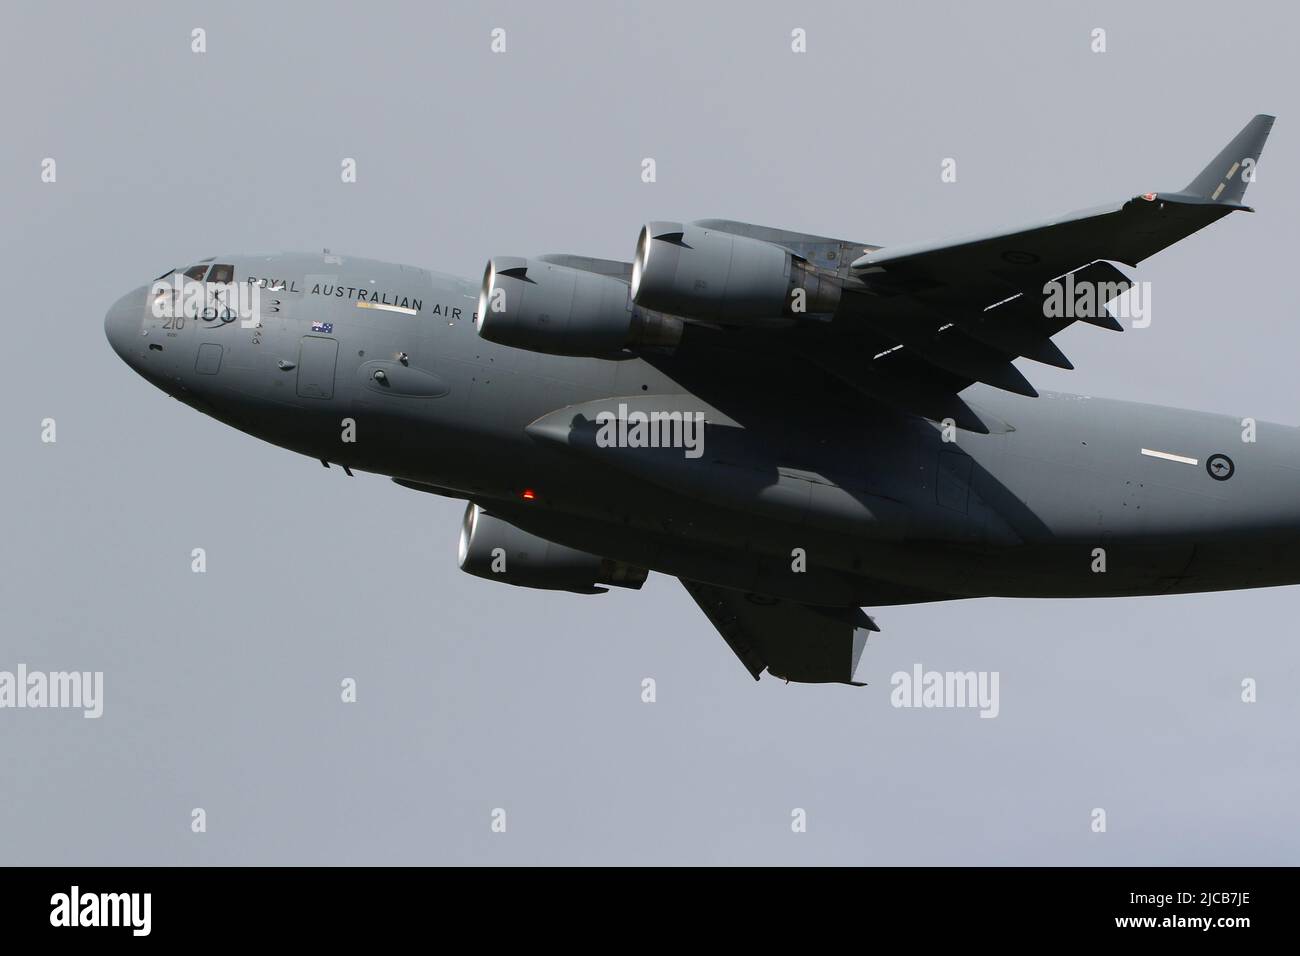 A41-210, a Boeing C-17 Globemaster III operated by the Royal Australian Air Force (RAAF), wearing markings to celebrate the force's centenial anniversary, departing from Prestwick International Airport in Ayrshire, Scotland, on a flight to Poland. Stock Photo